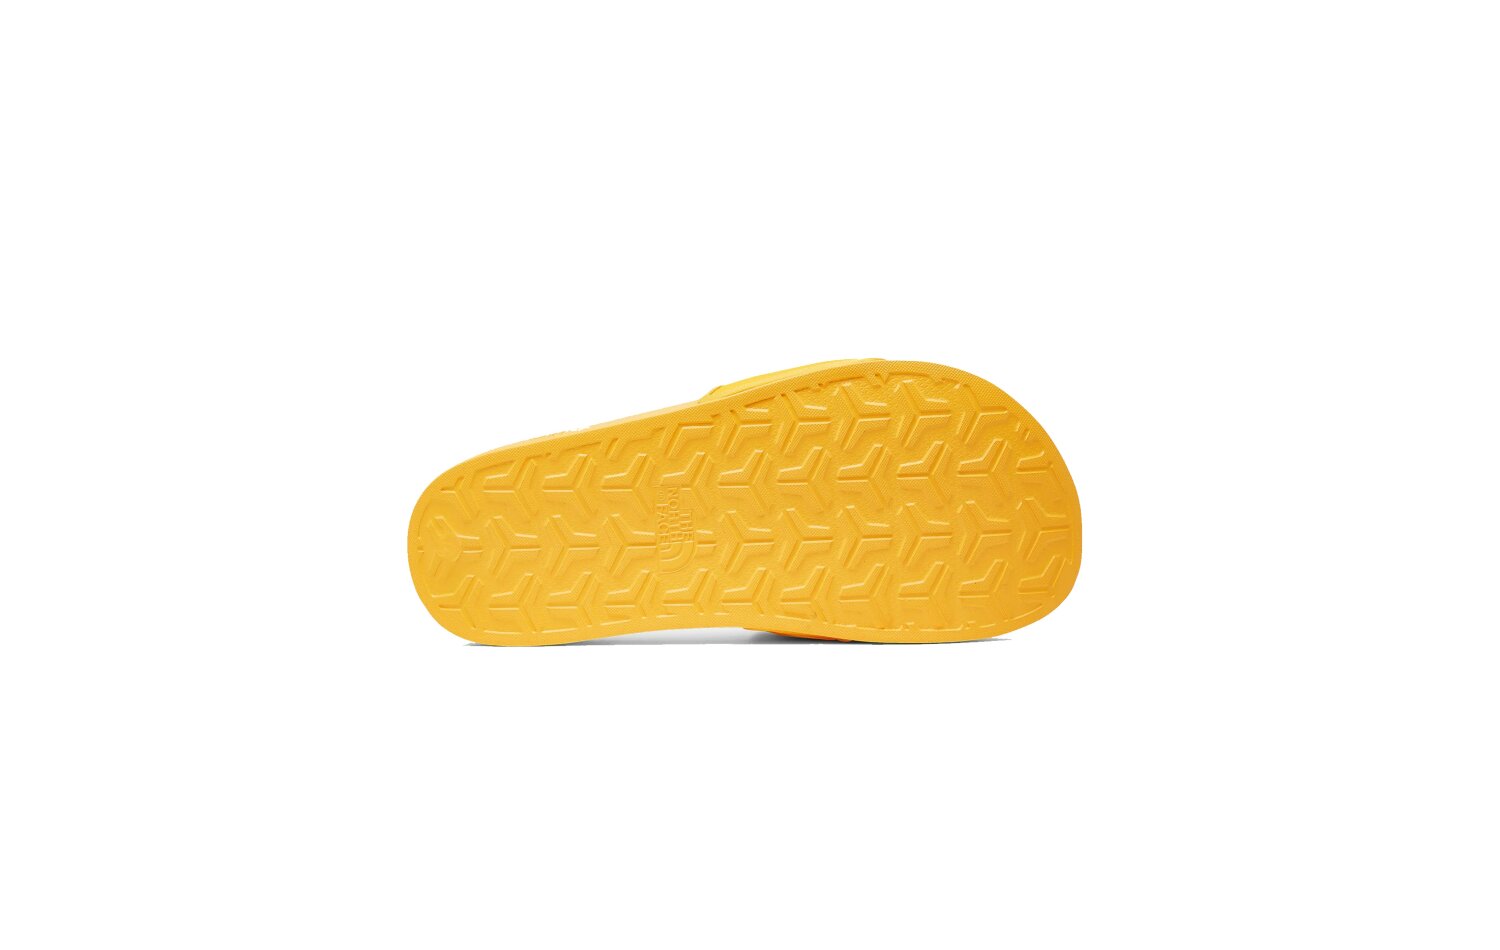 The North Face Basecamp Slide III (NF0A4T2RZU3)